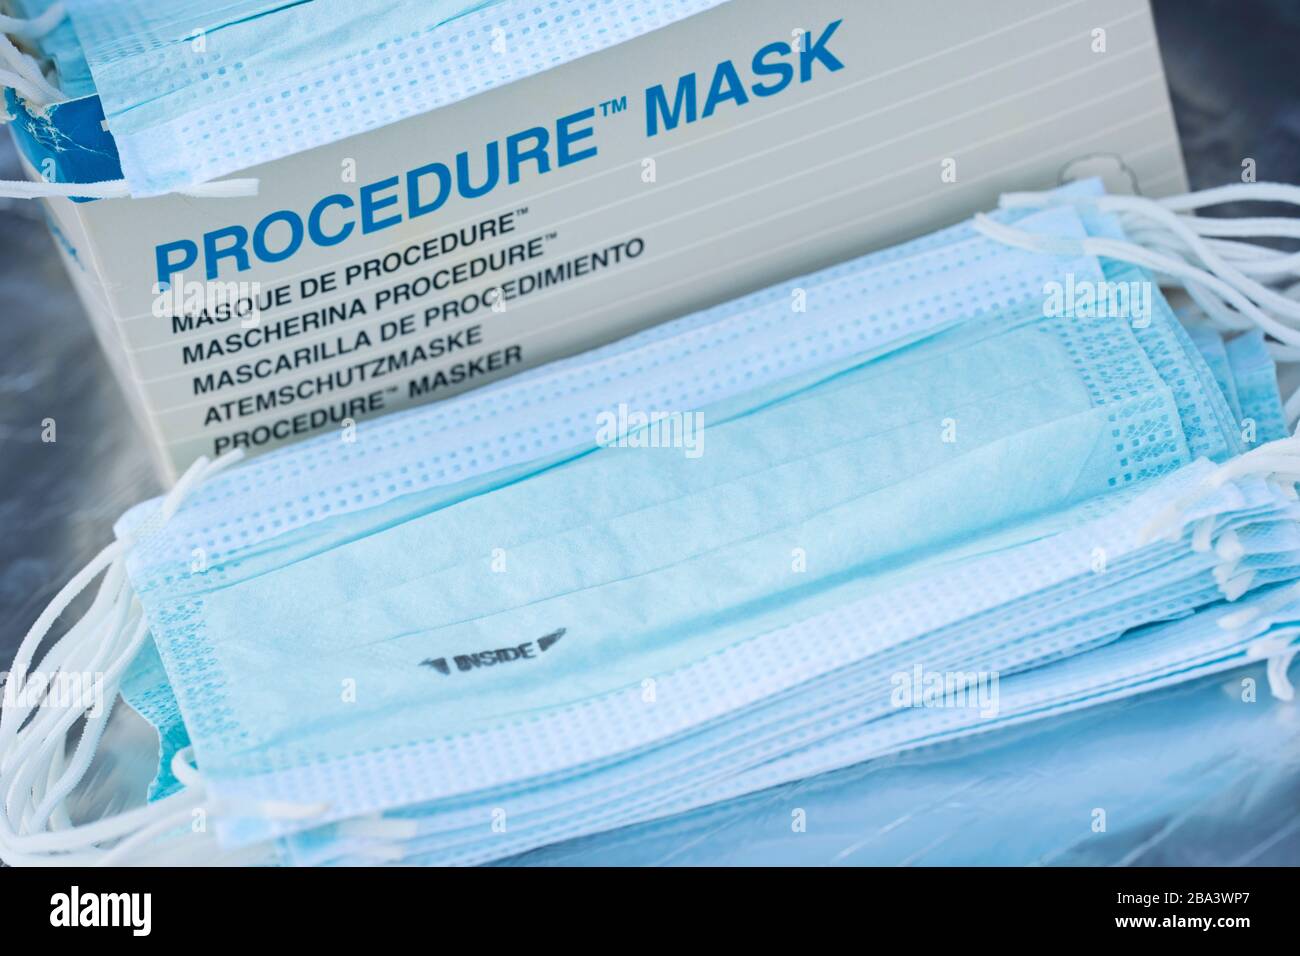 Box of Procedure Masks, Medical Face Masks to protect from COVID-19, Coronavirus infection, COVID supplies Stock Photo